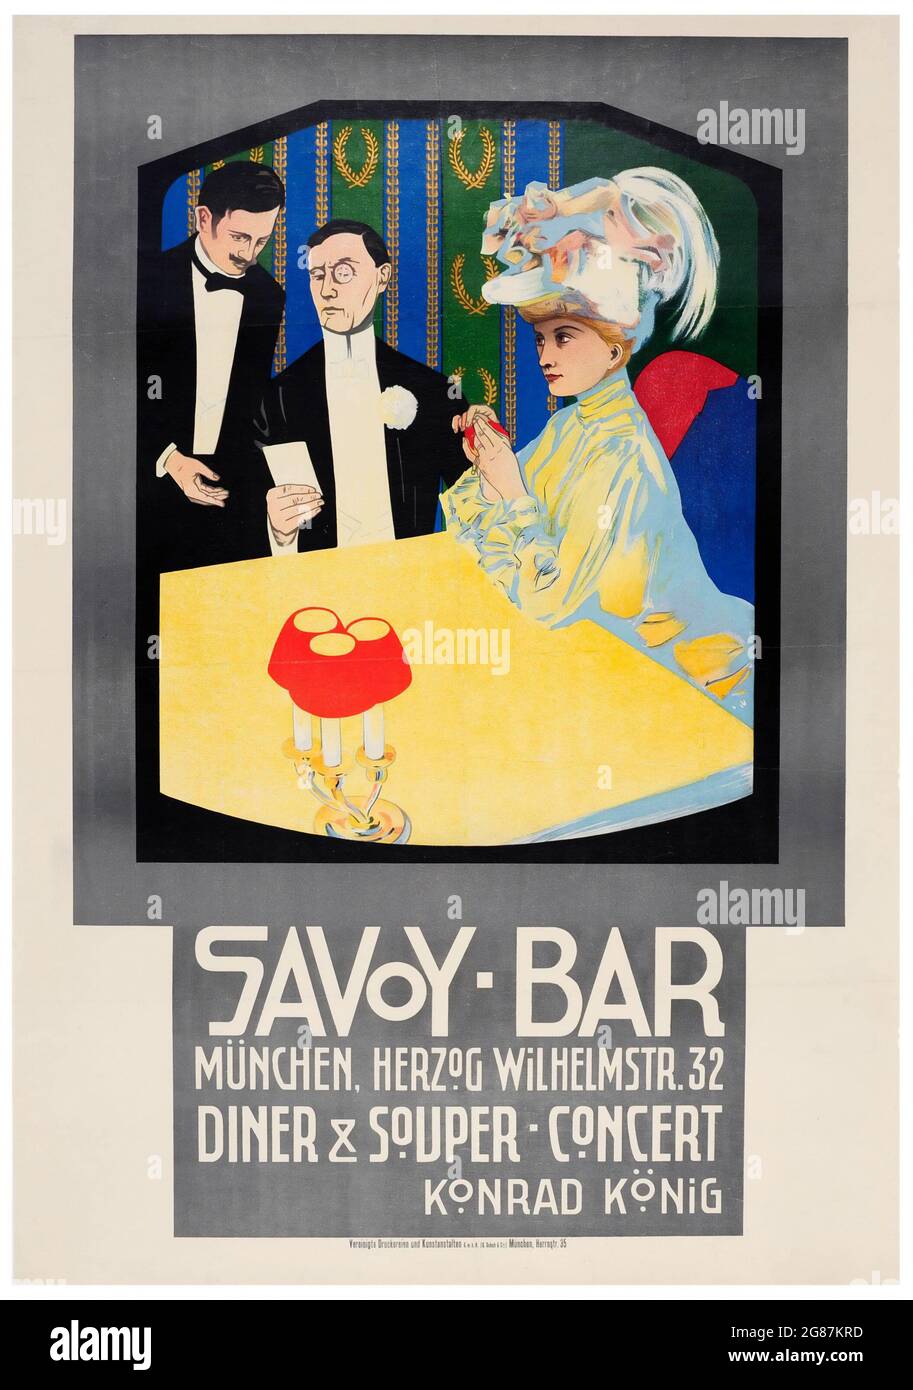 Antique Poster for a Dinner Concert at the Savoy Bar – München / Munich Stock Photo